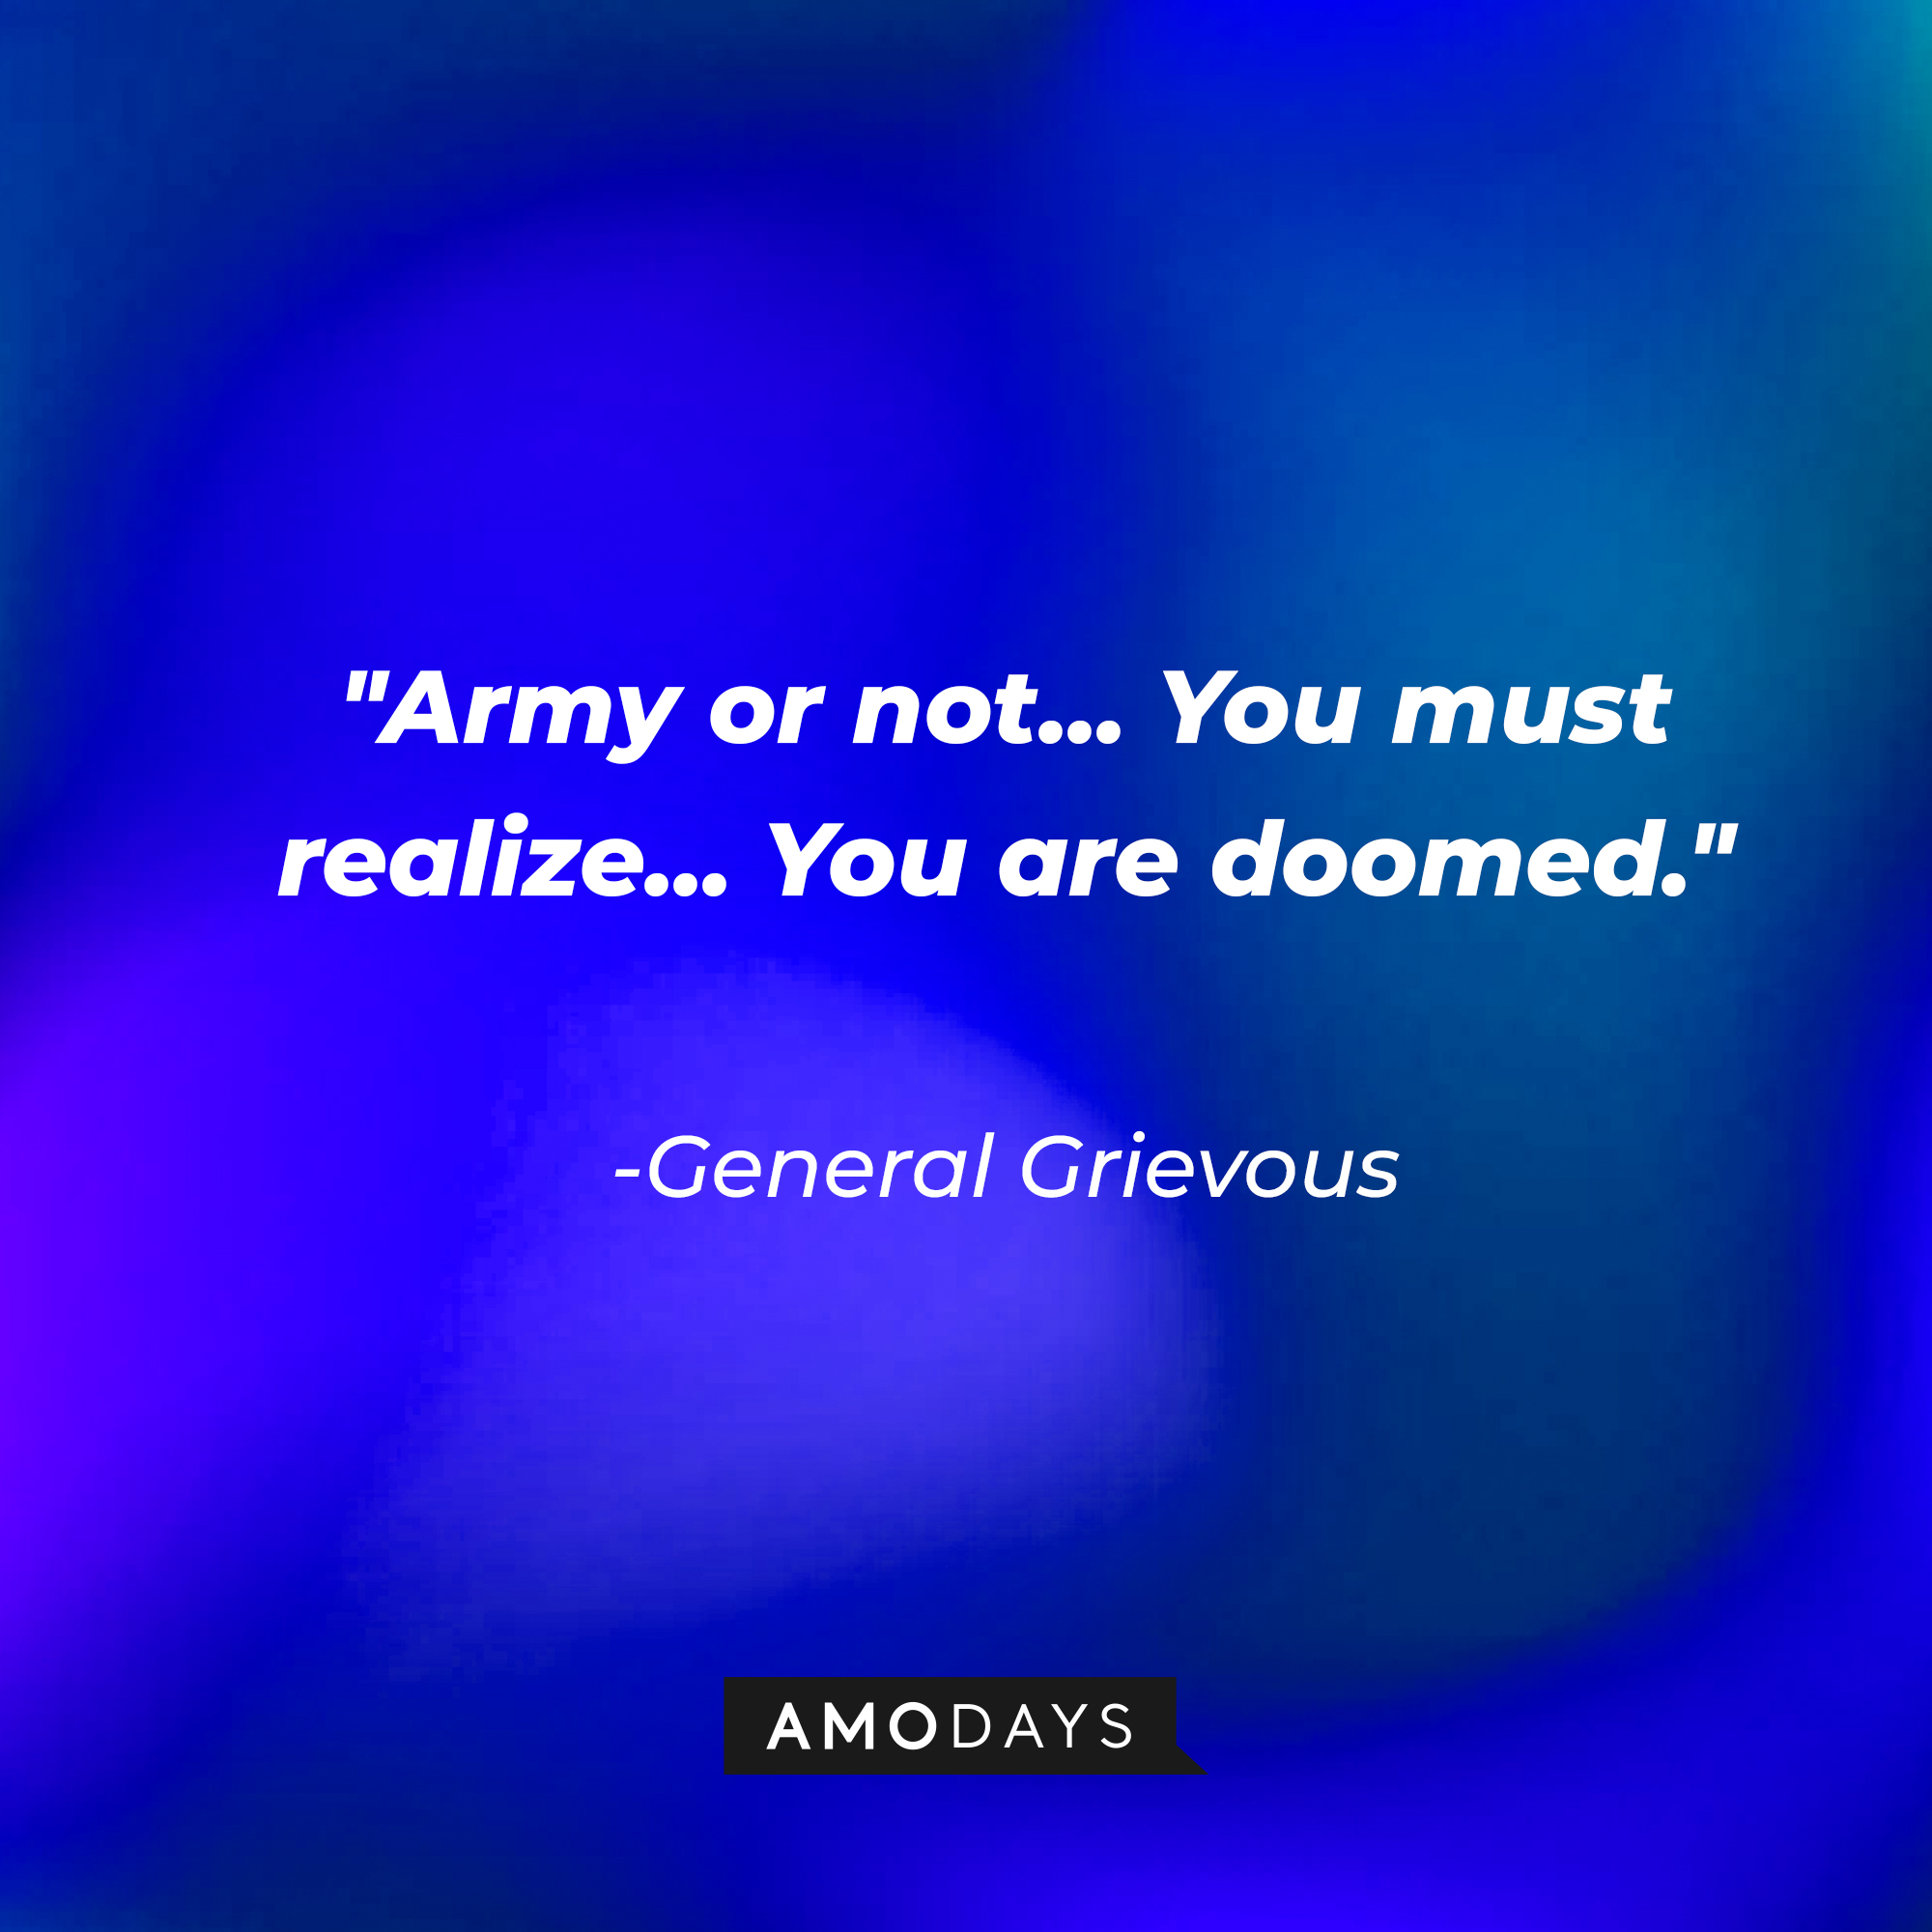 General Grievous' quote: "Army or not... You must realize... You are doomed." | Source: AmoDays